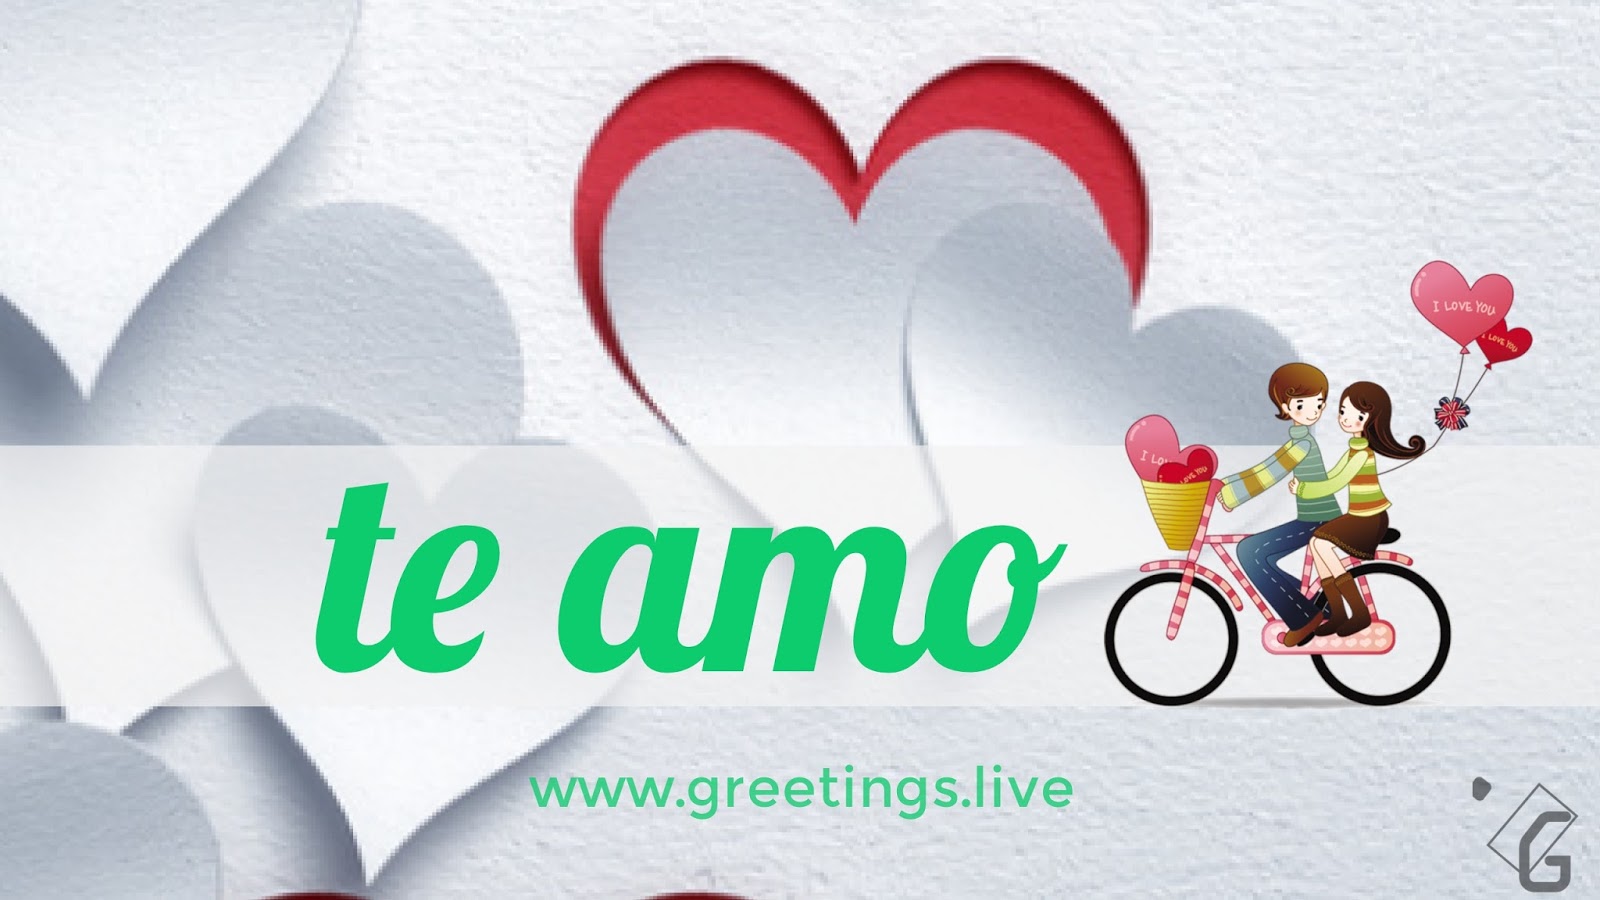 *Free Daily Greetings Pictures Festival GIF Images: I Love  you in Spanish( te amo)